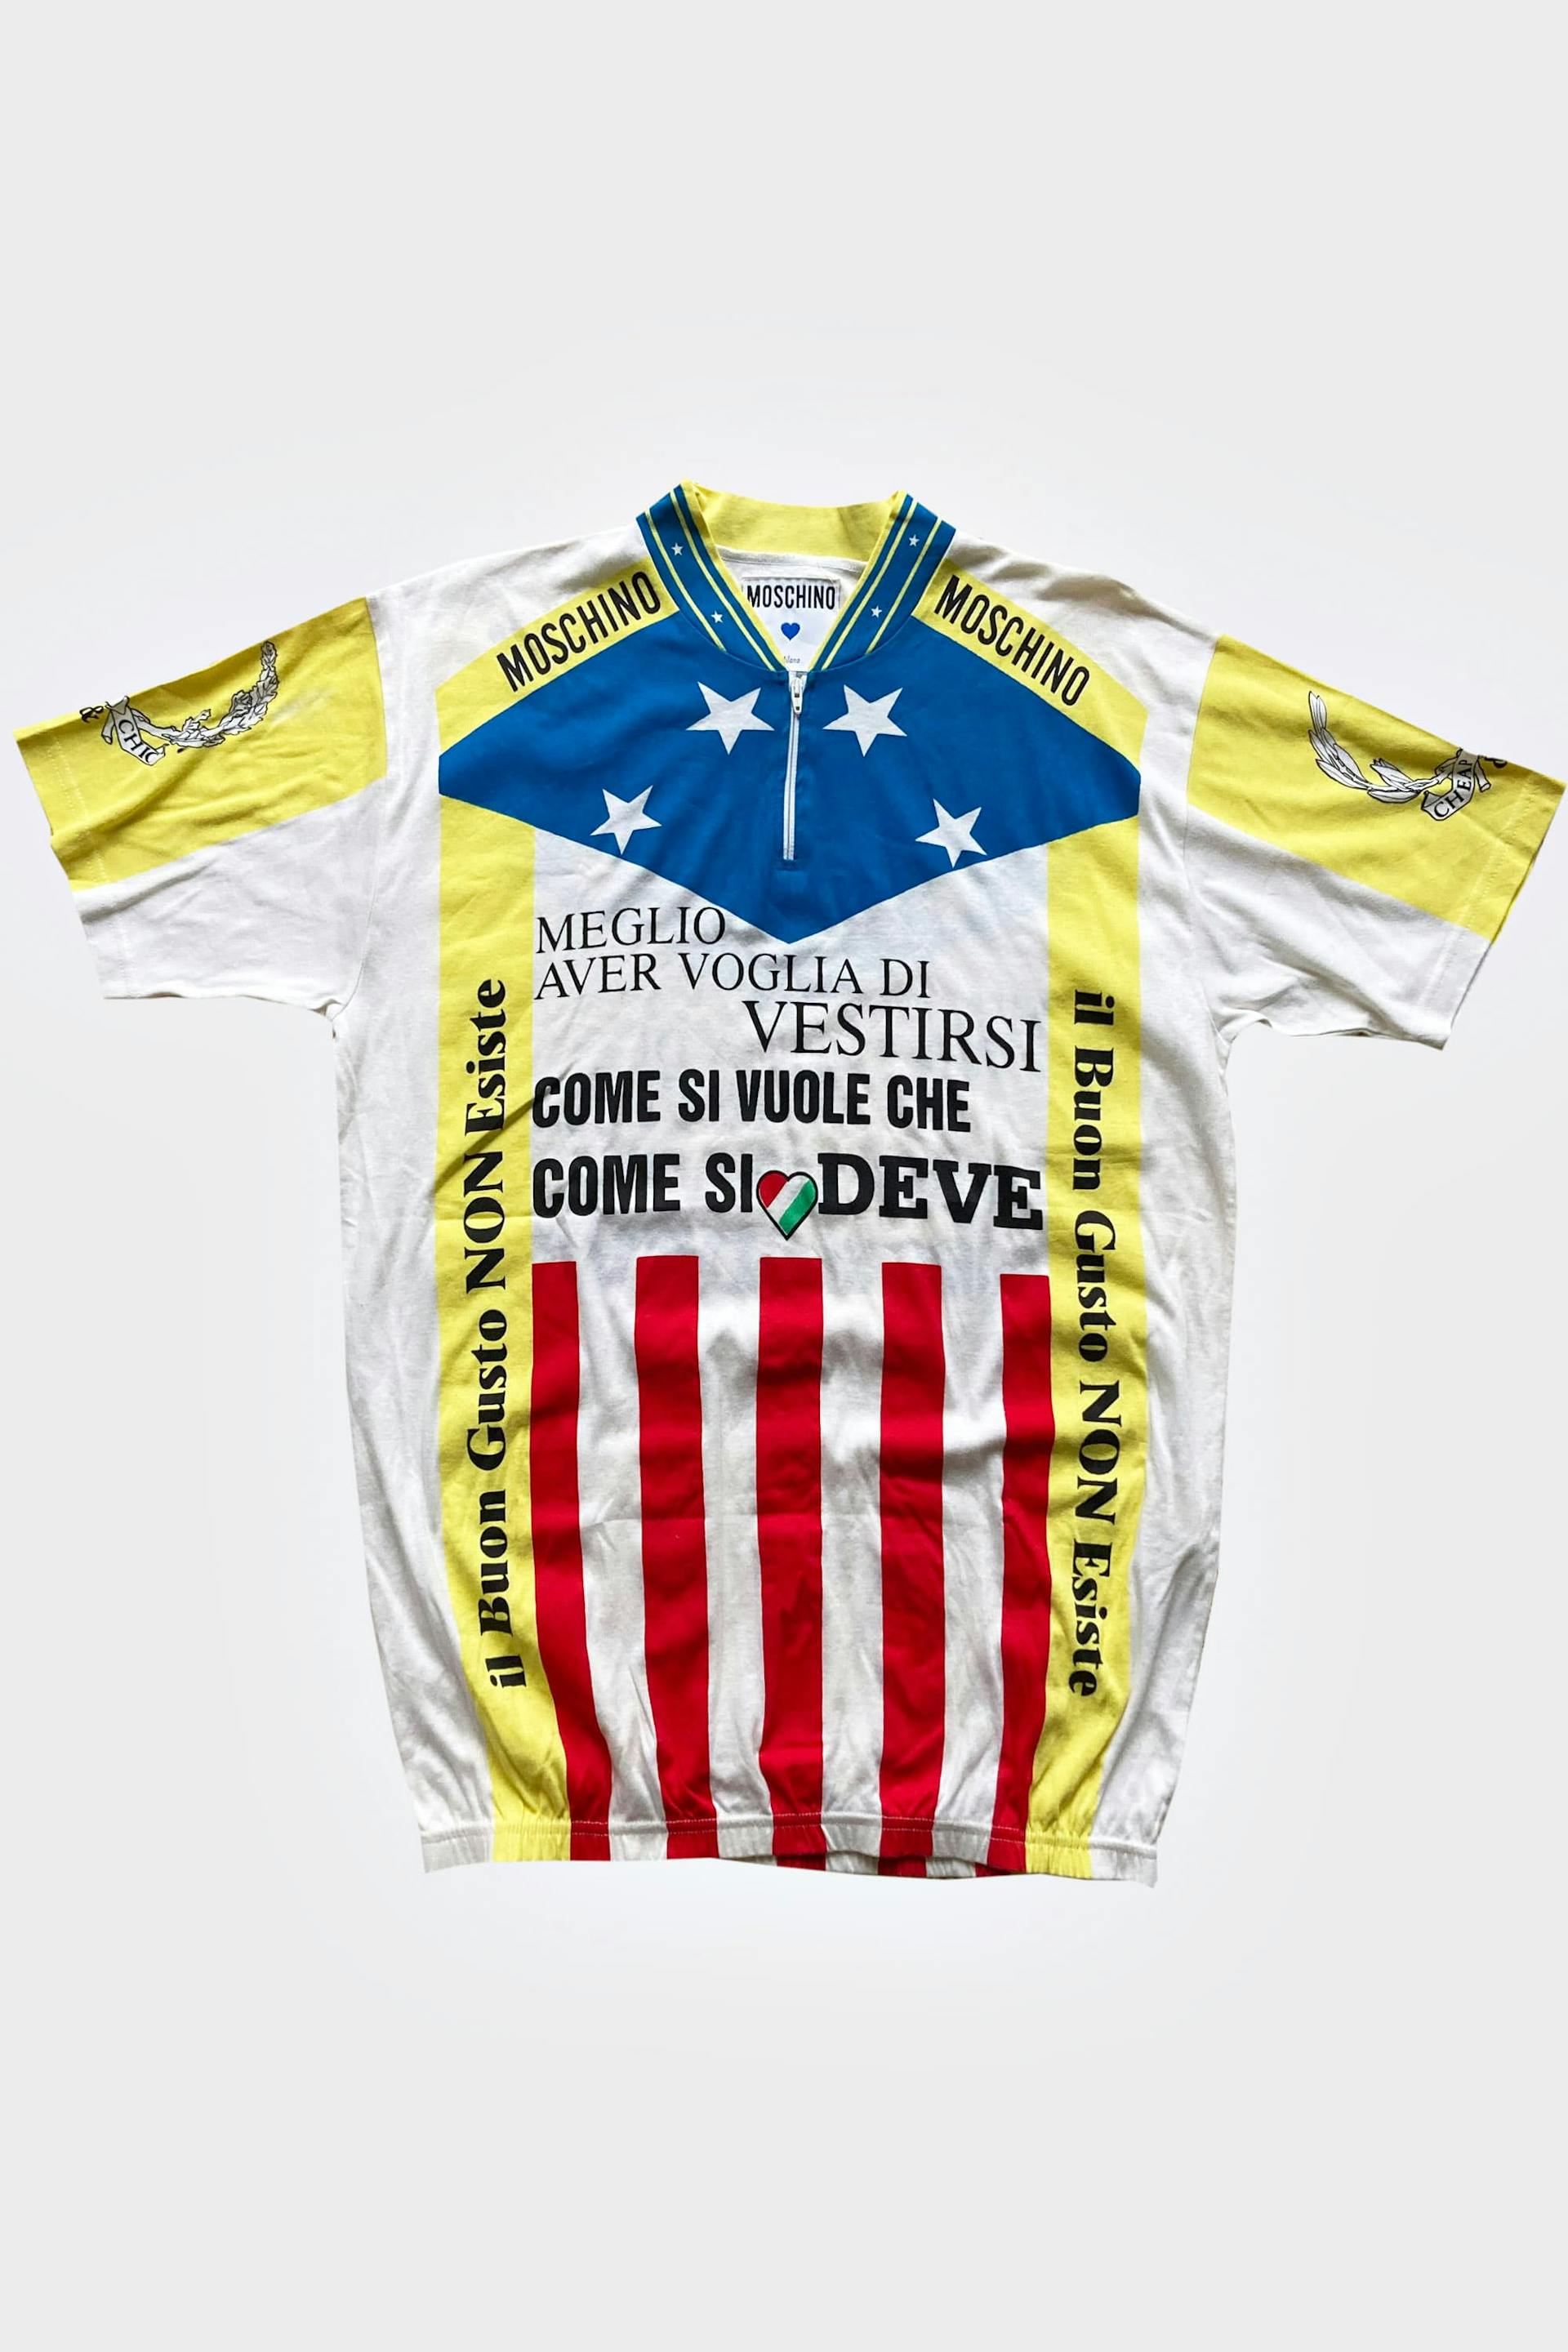 Vintage Moschino Cheap & Chic Cycling Jersey